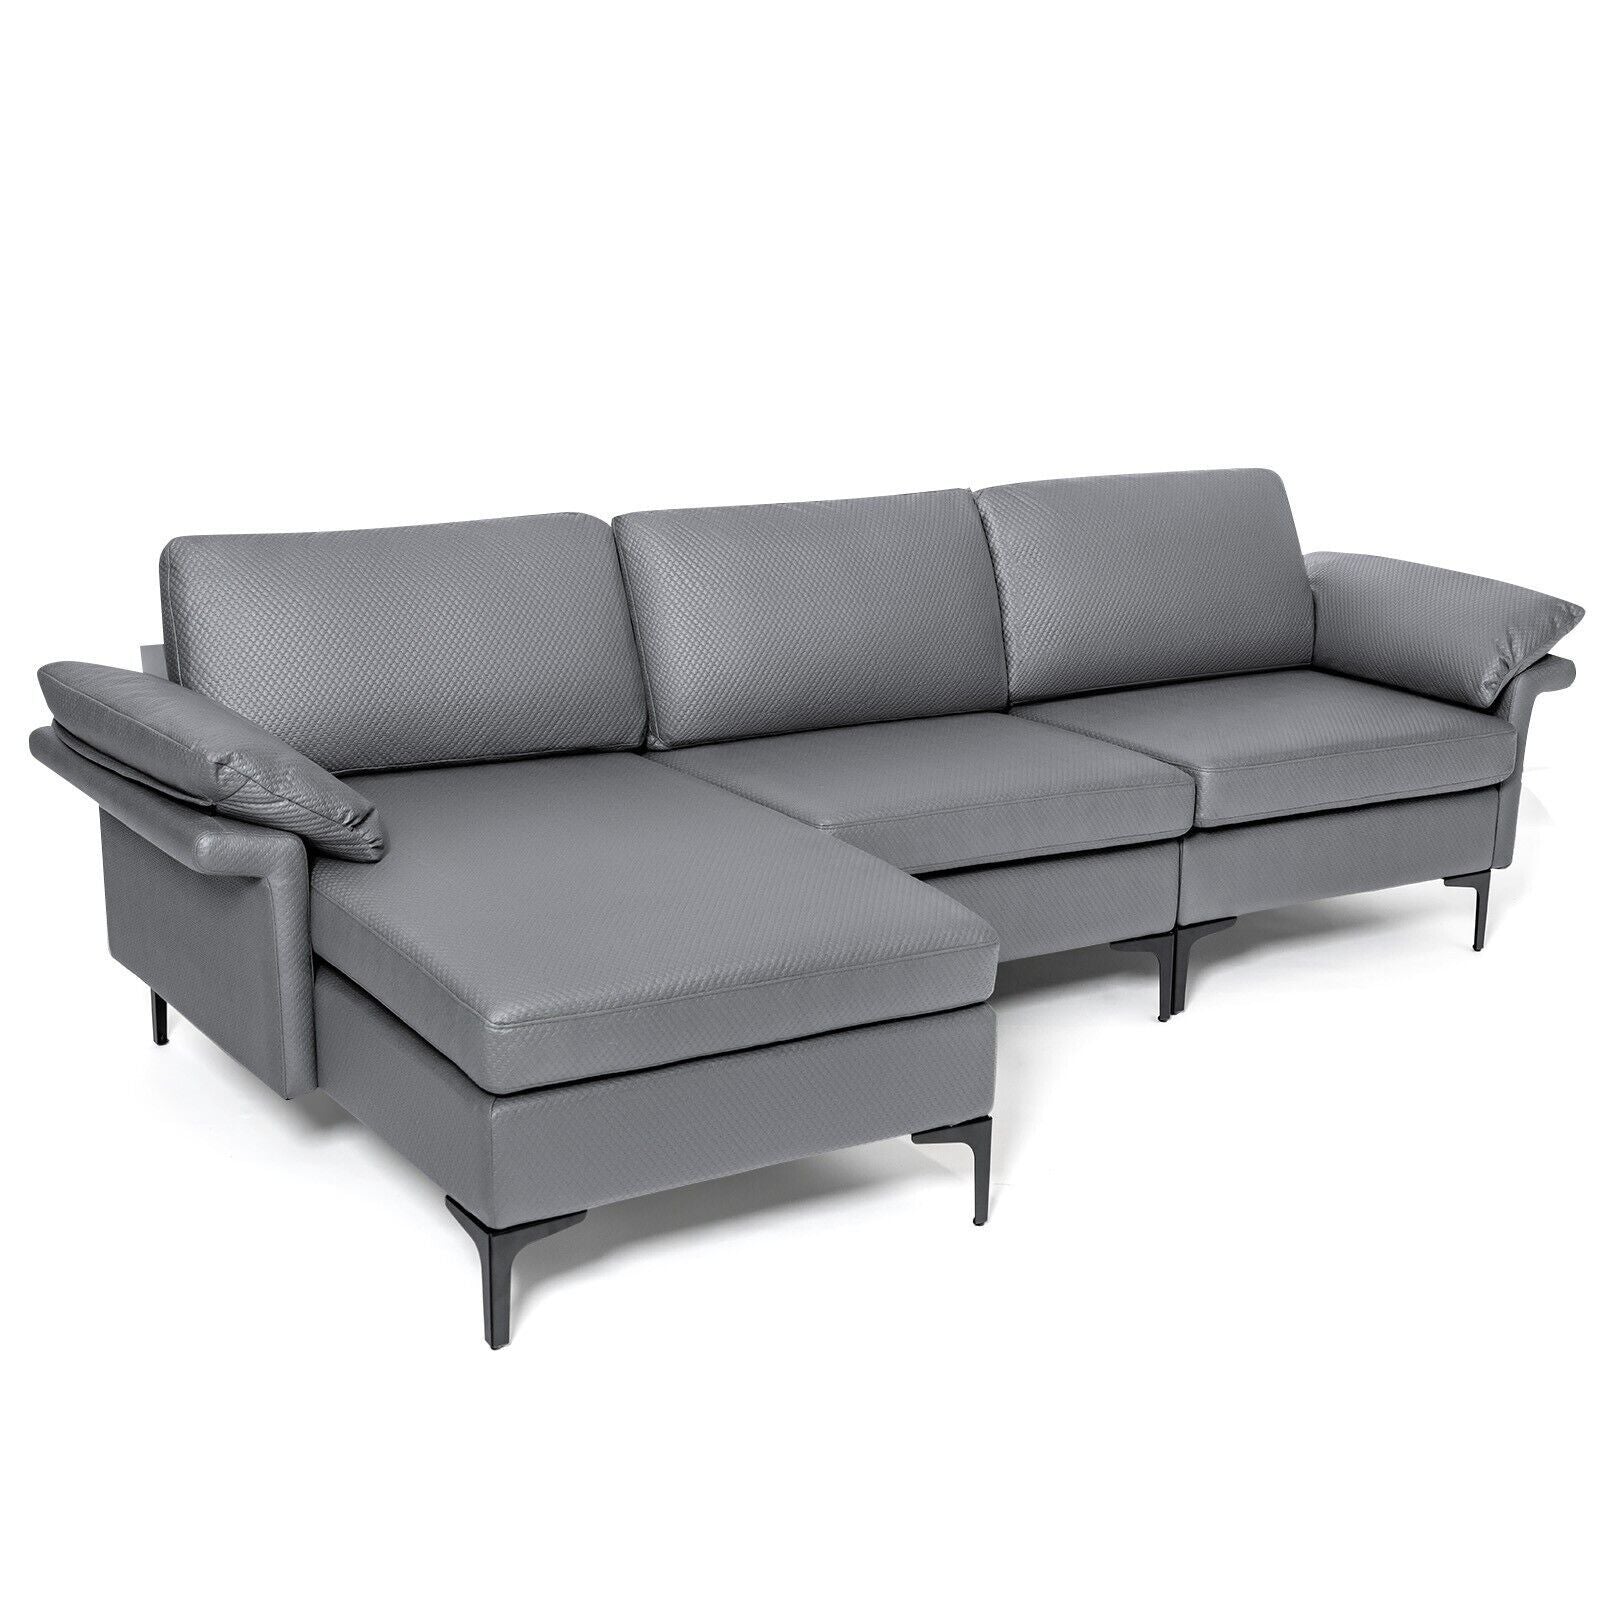 L-Shaped 3-Seat Upholstered Sectional Sofa